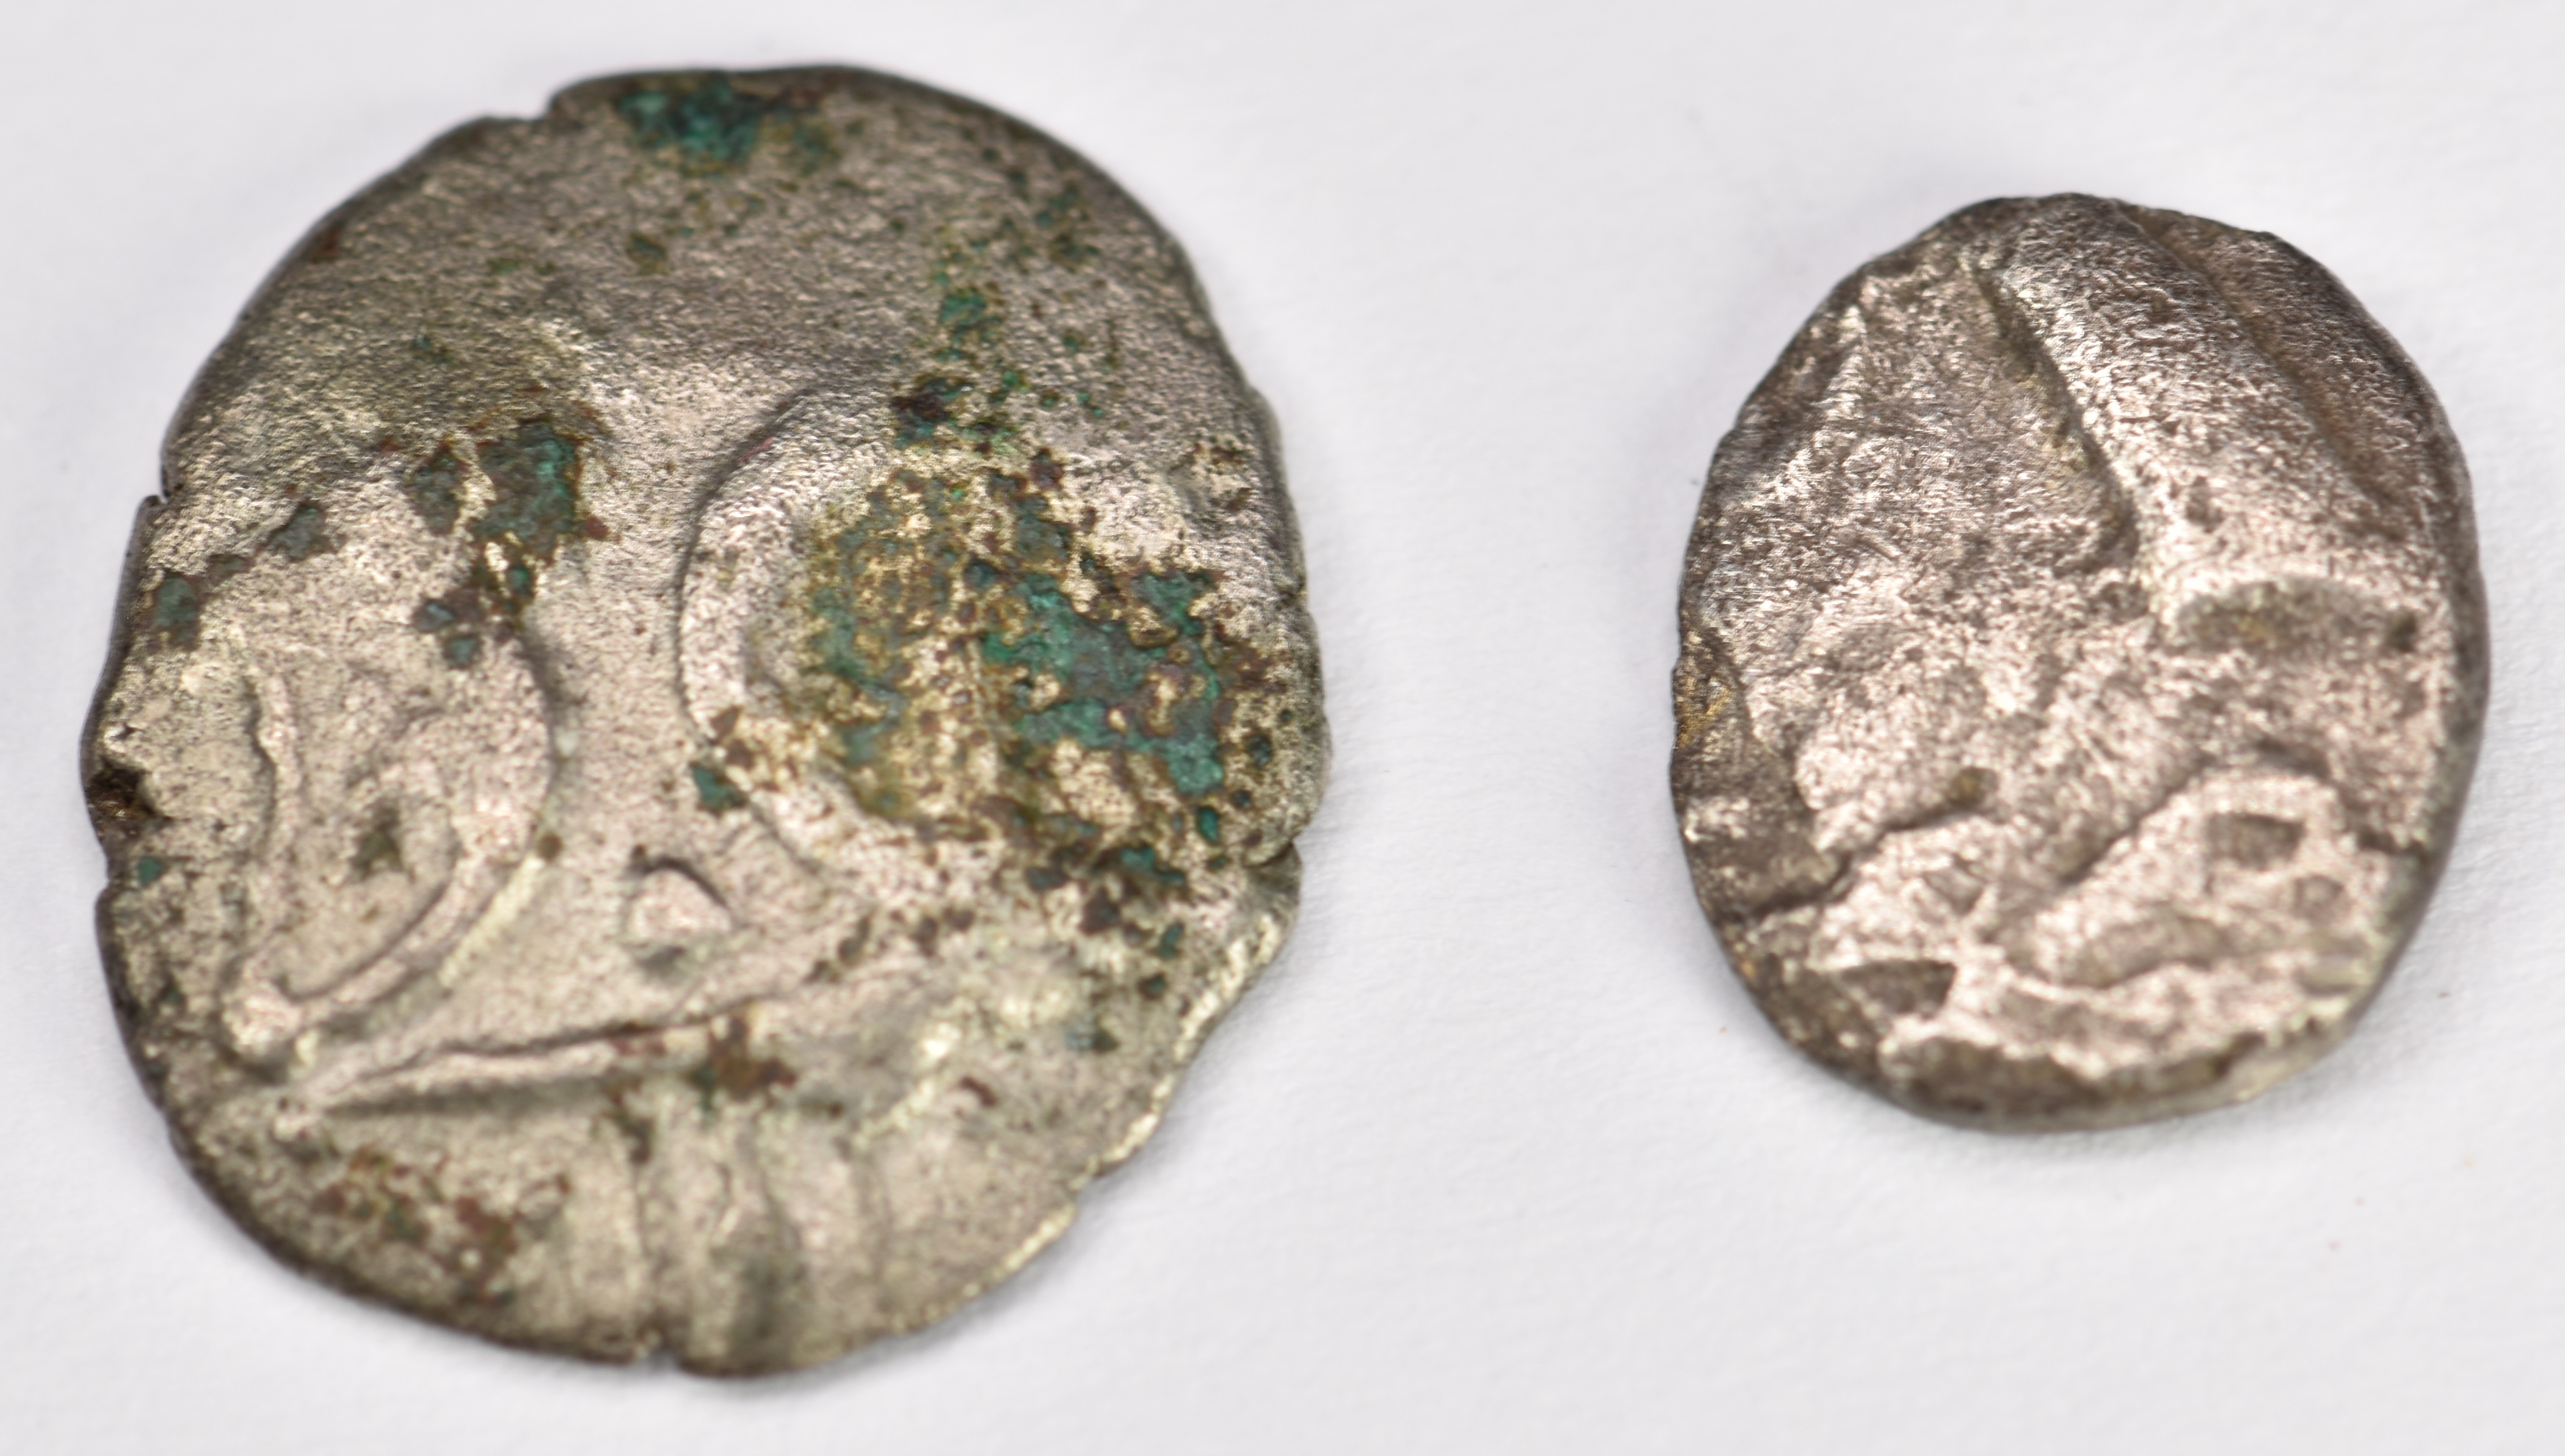 Two Celtic silver Iceni coins, one being a boar horse type the other double crescent type - Image 2 of 2